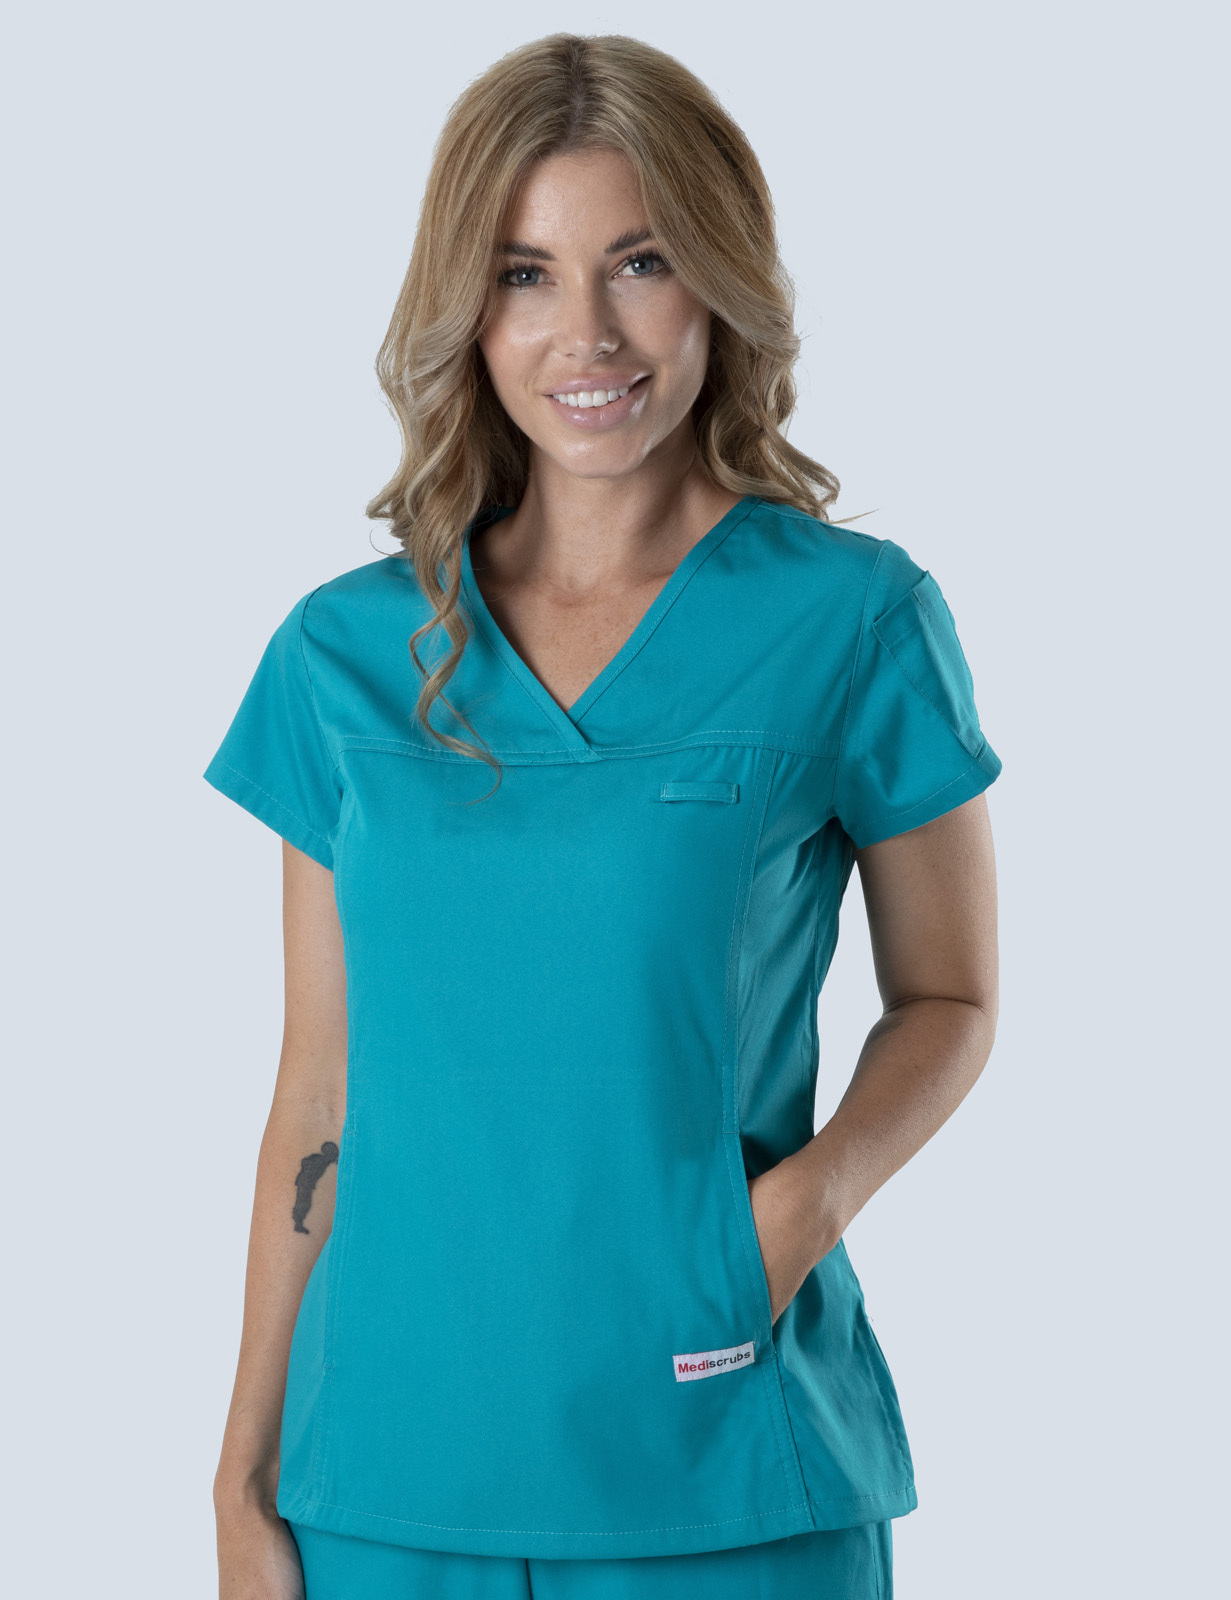 Women's Fit Solid Scrub Top - Teal - X Small